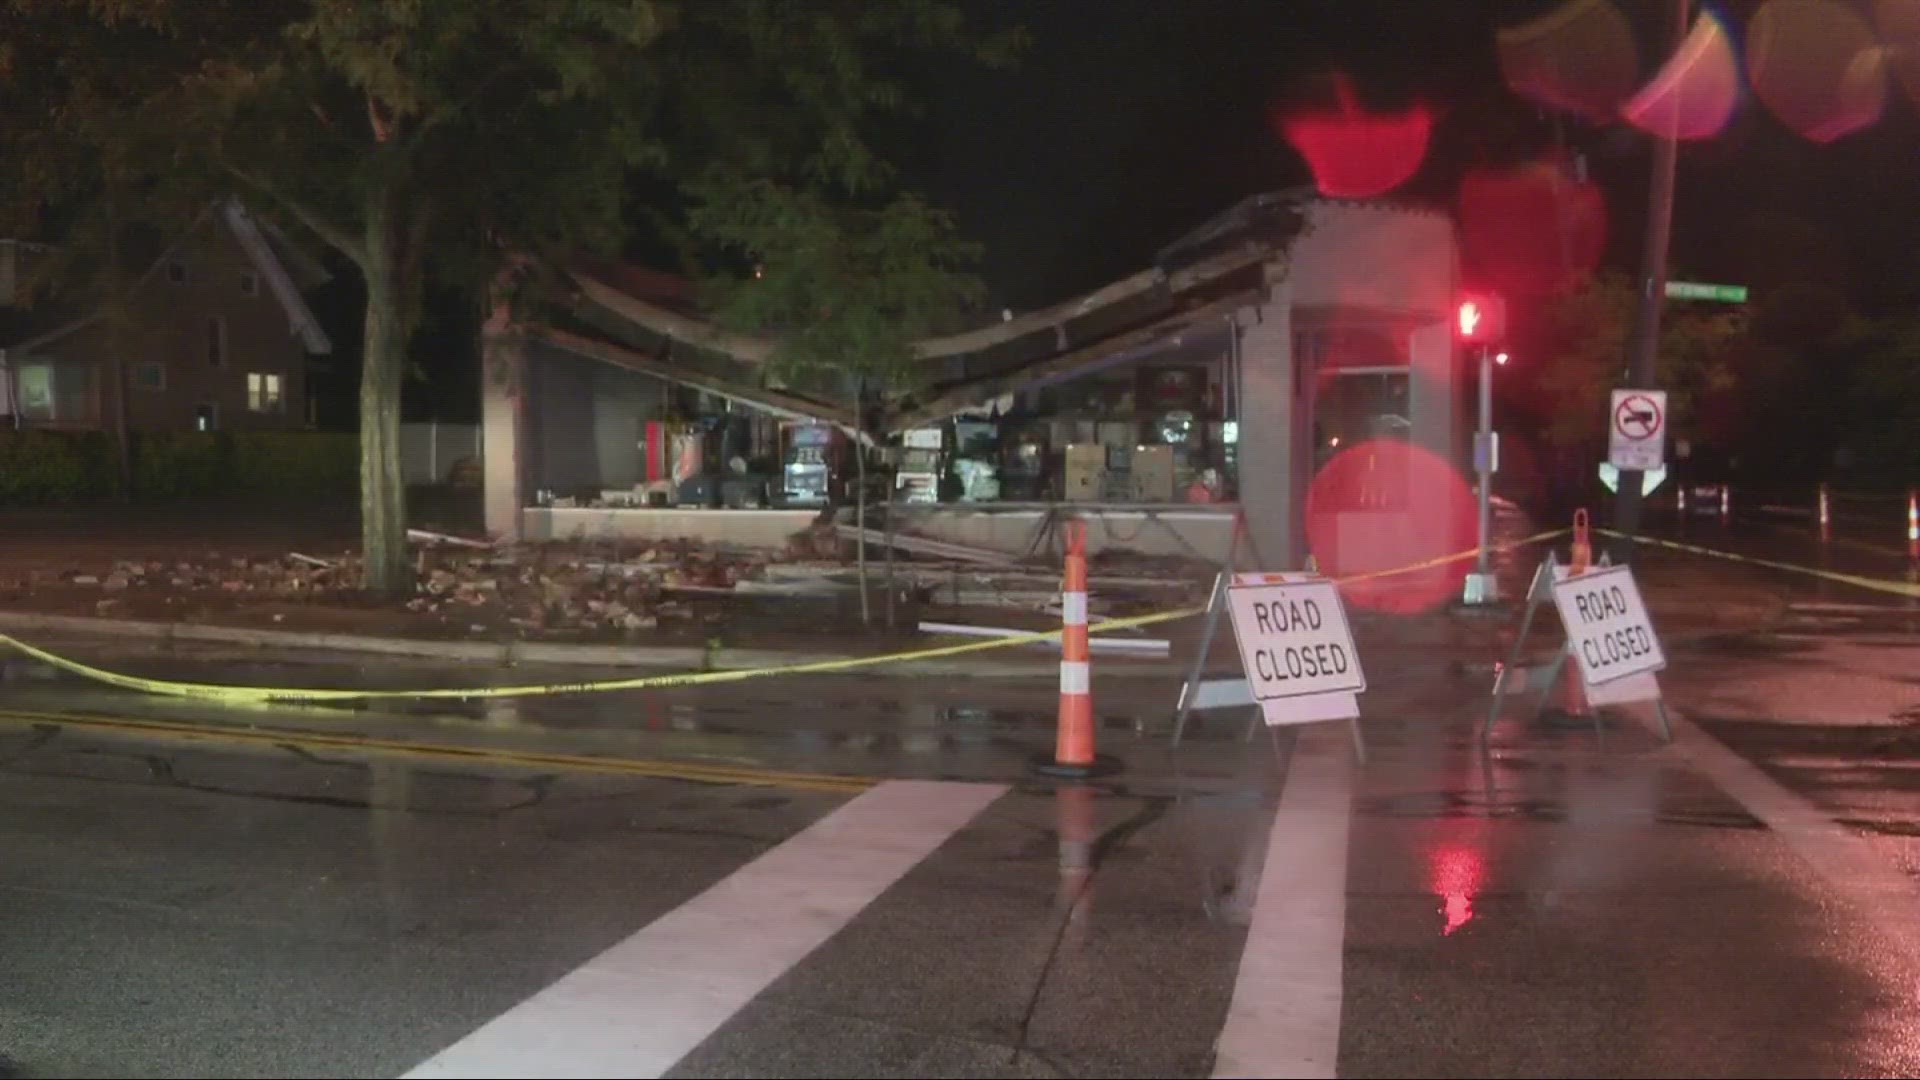 As strong storms impacted the region, the roof of the Pinball Shoppe collapsed in North Olmsted.